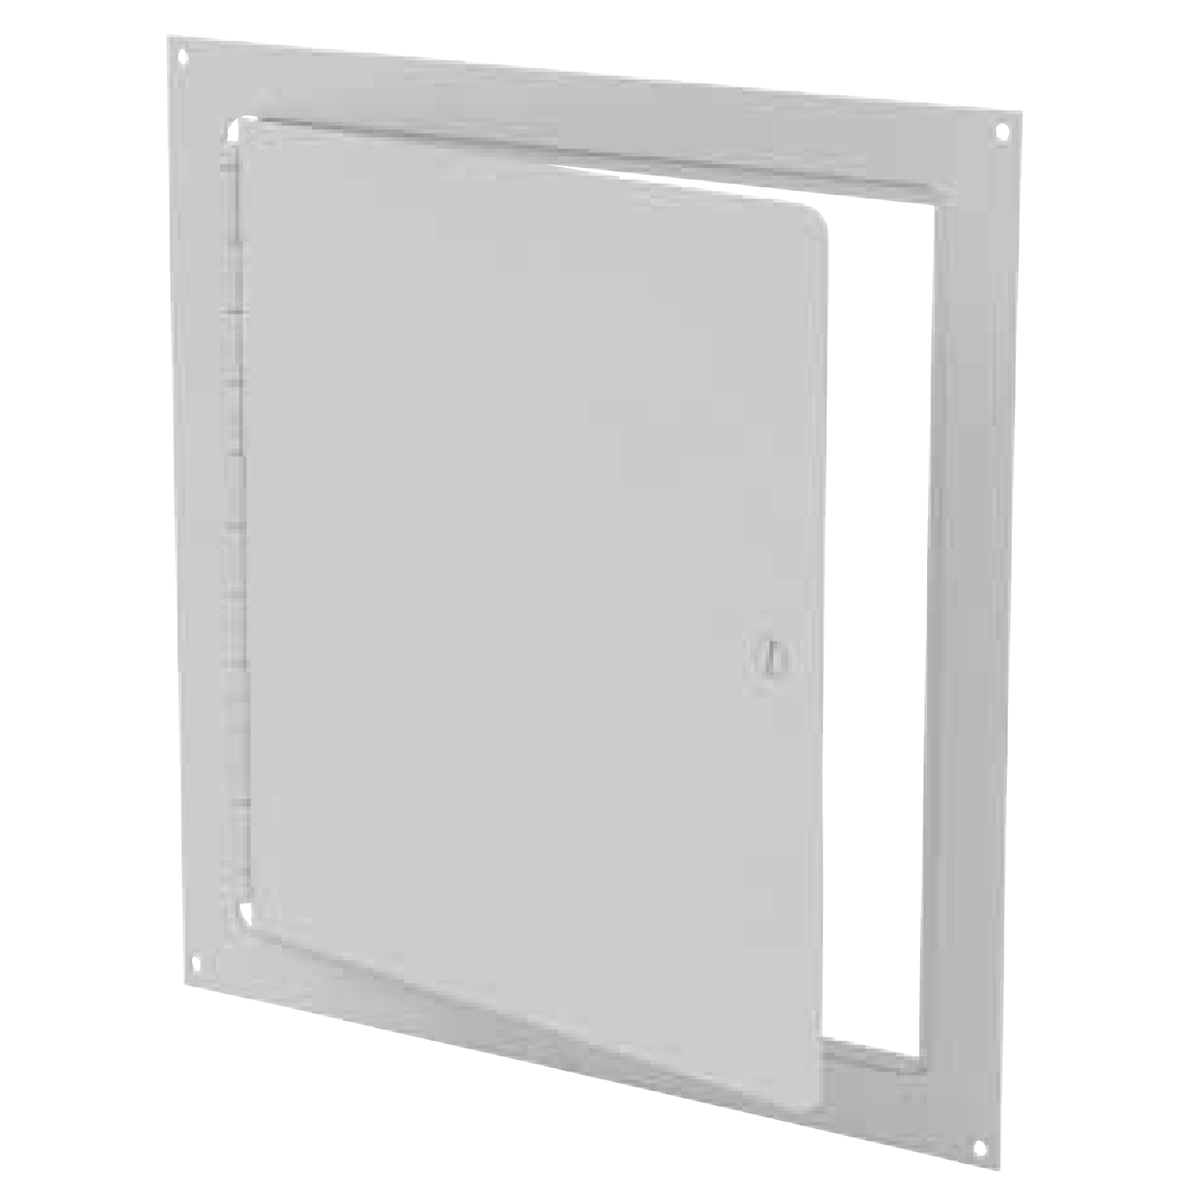 Access Door - E-SF 18x18 Surface Mount, Primer Coated Steel